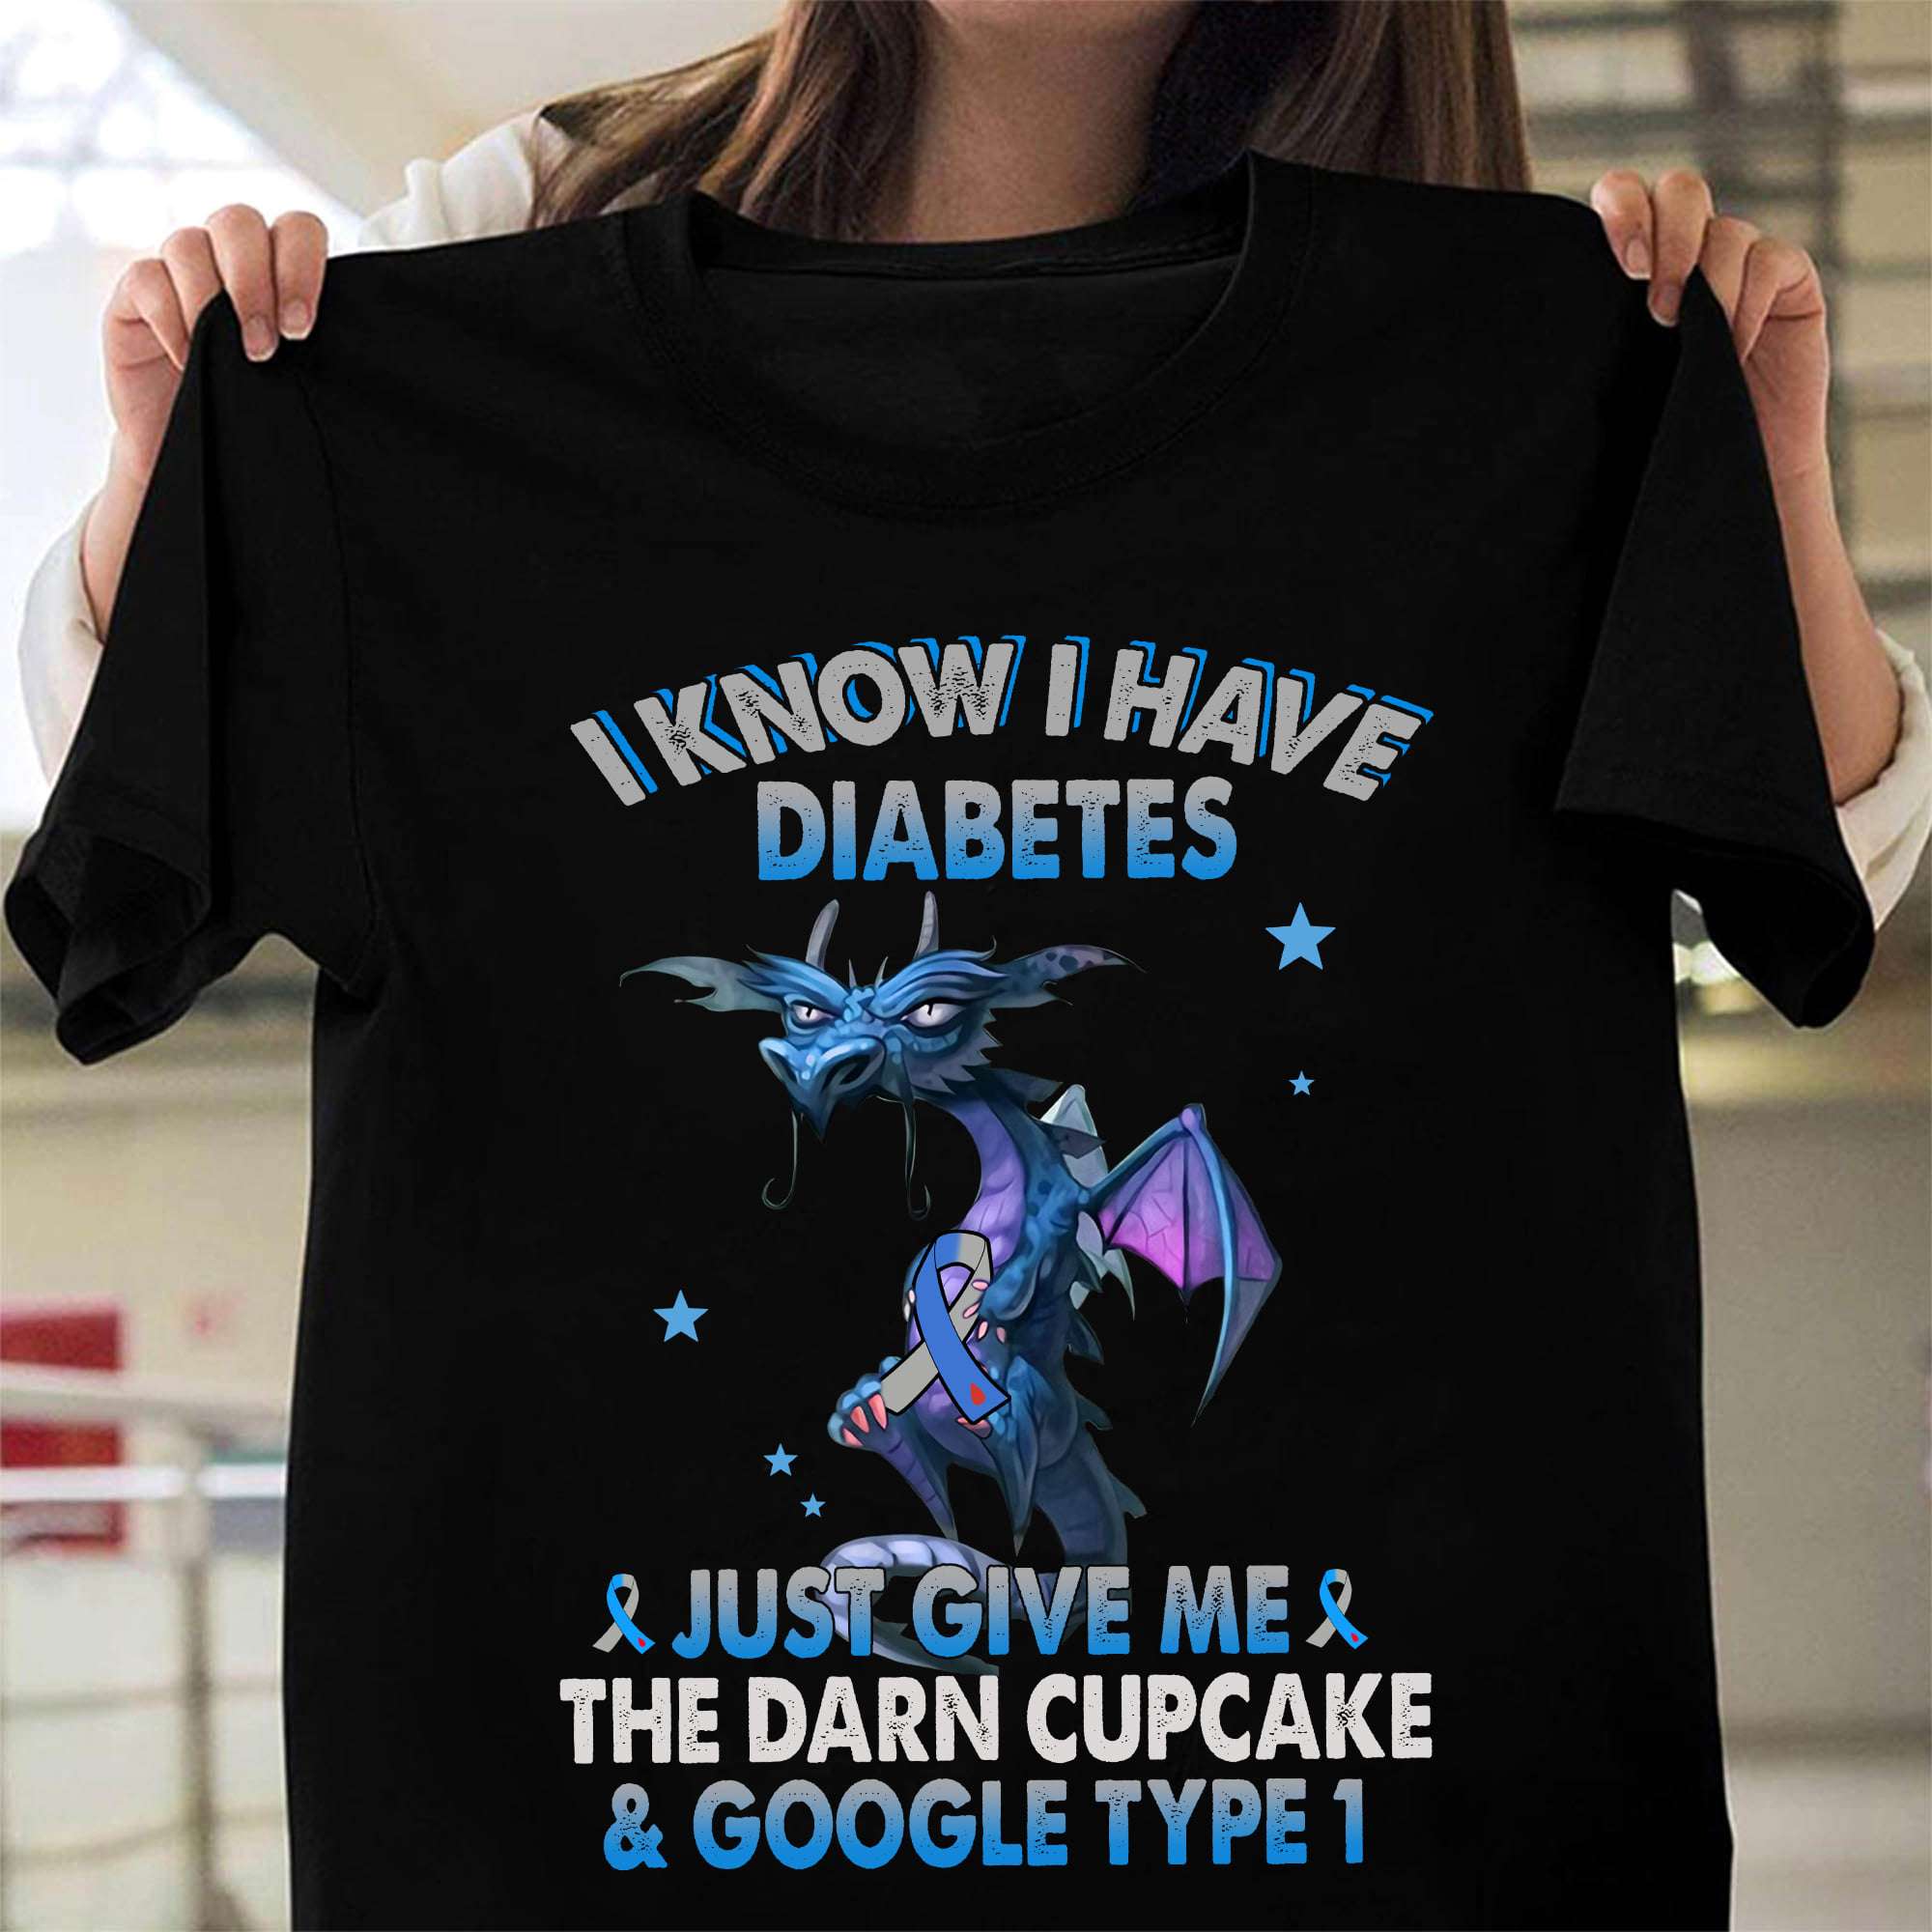 I know I have diabetes, just give me the darn cupcake and google type 1 - Diabetic dragon, diabetes awareness